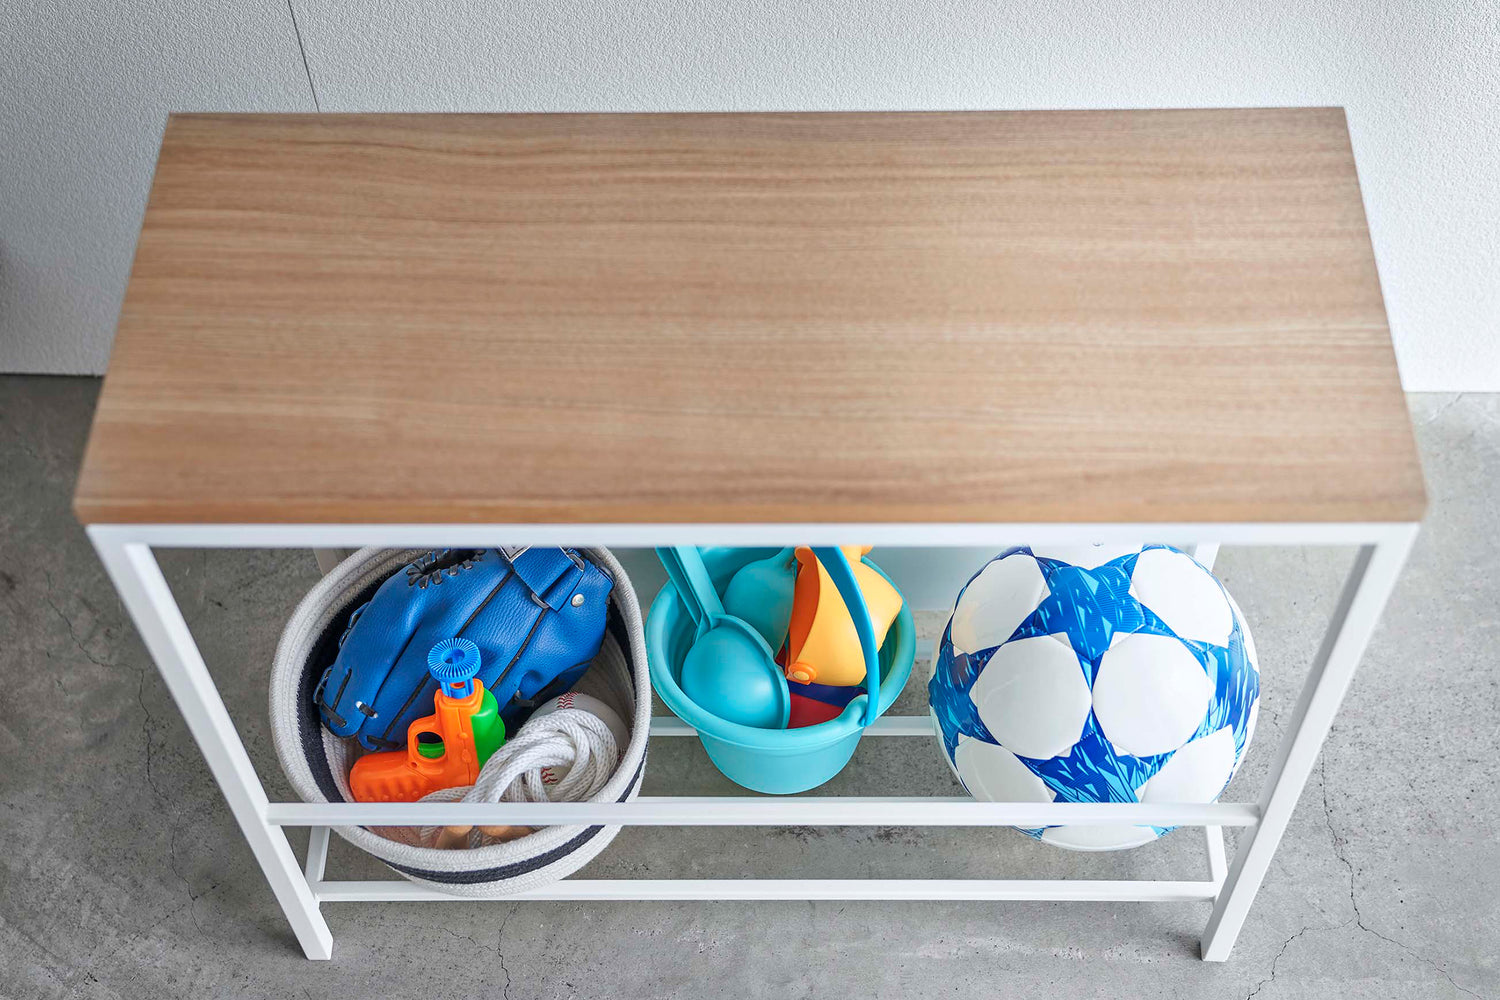 View 8 - Close up view of white Yamazaki Discreet Entryway Storage Shelf with toys and balls inside